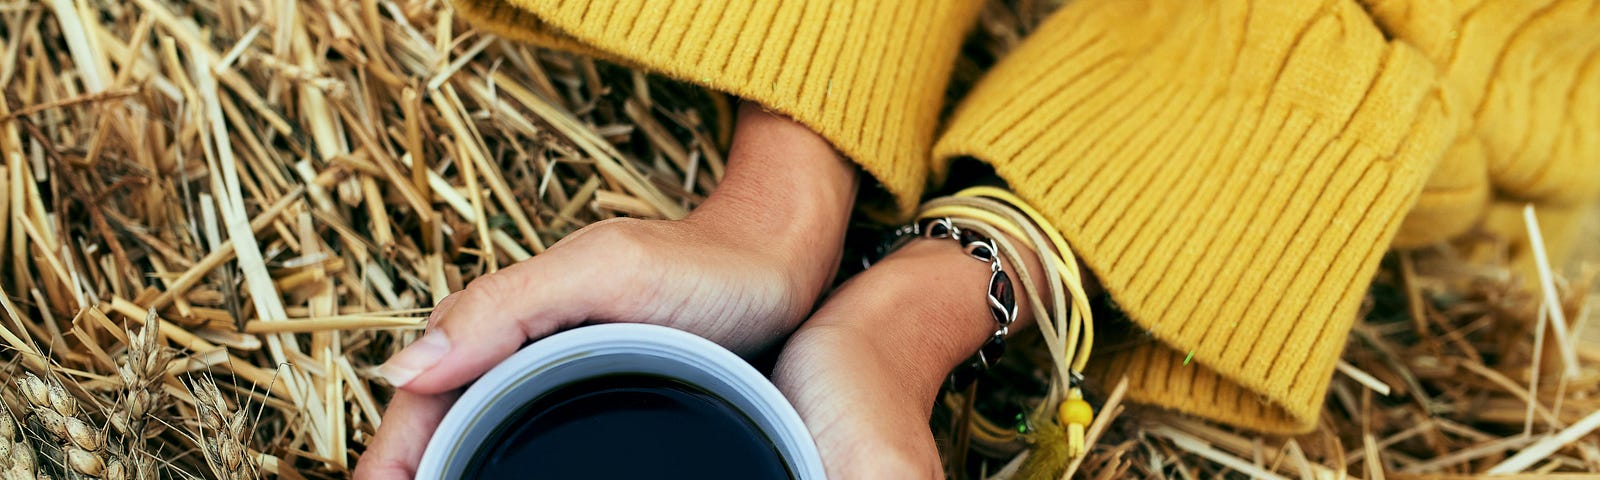 A woman in a yellow sweater holds a cup of coffee in both hands, with stalks of grain beneath it.